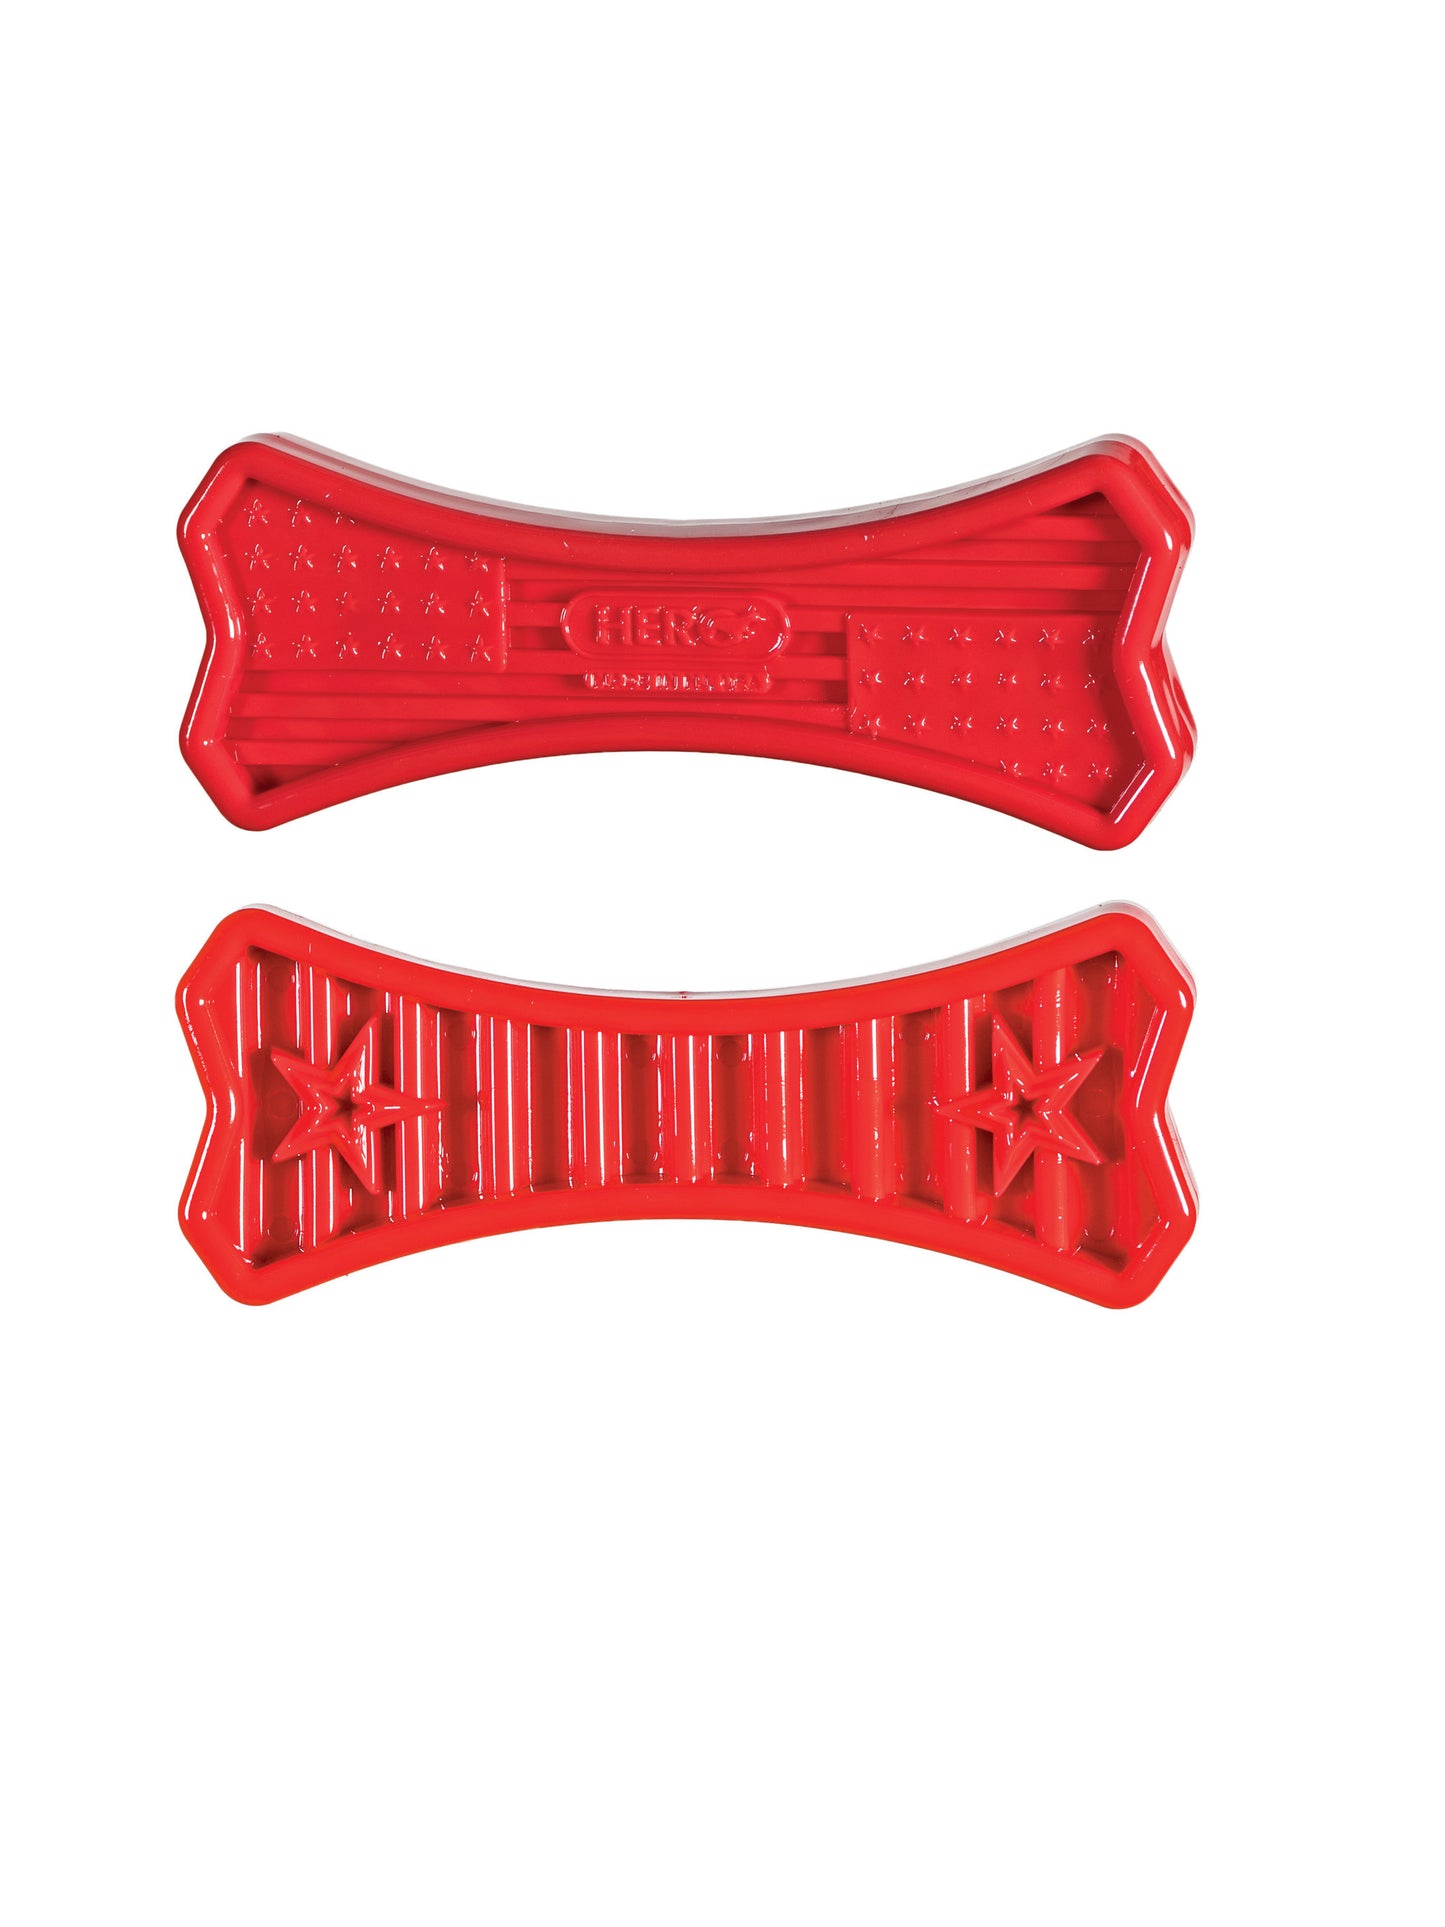 Red medium bone toy for dogs